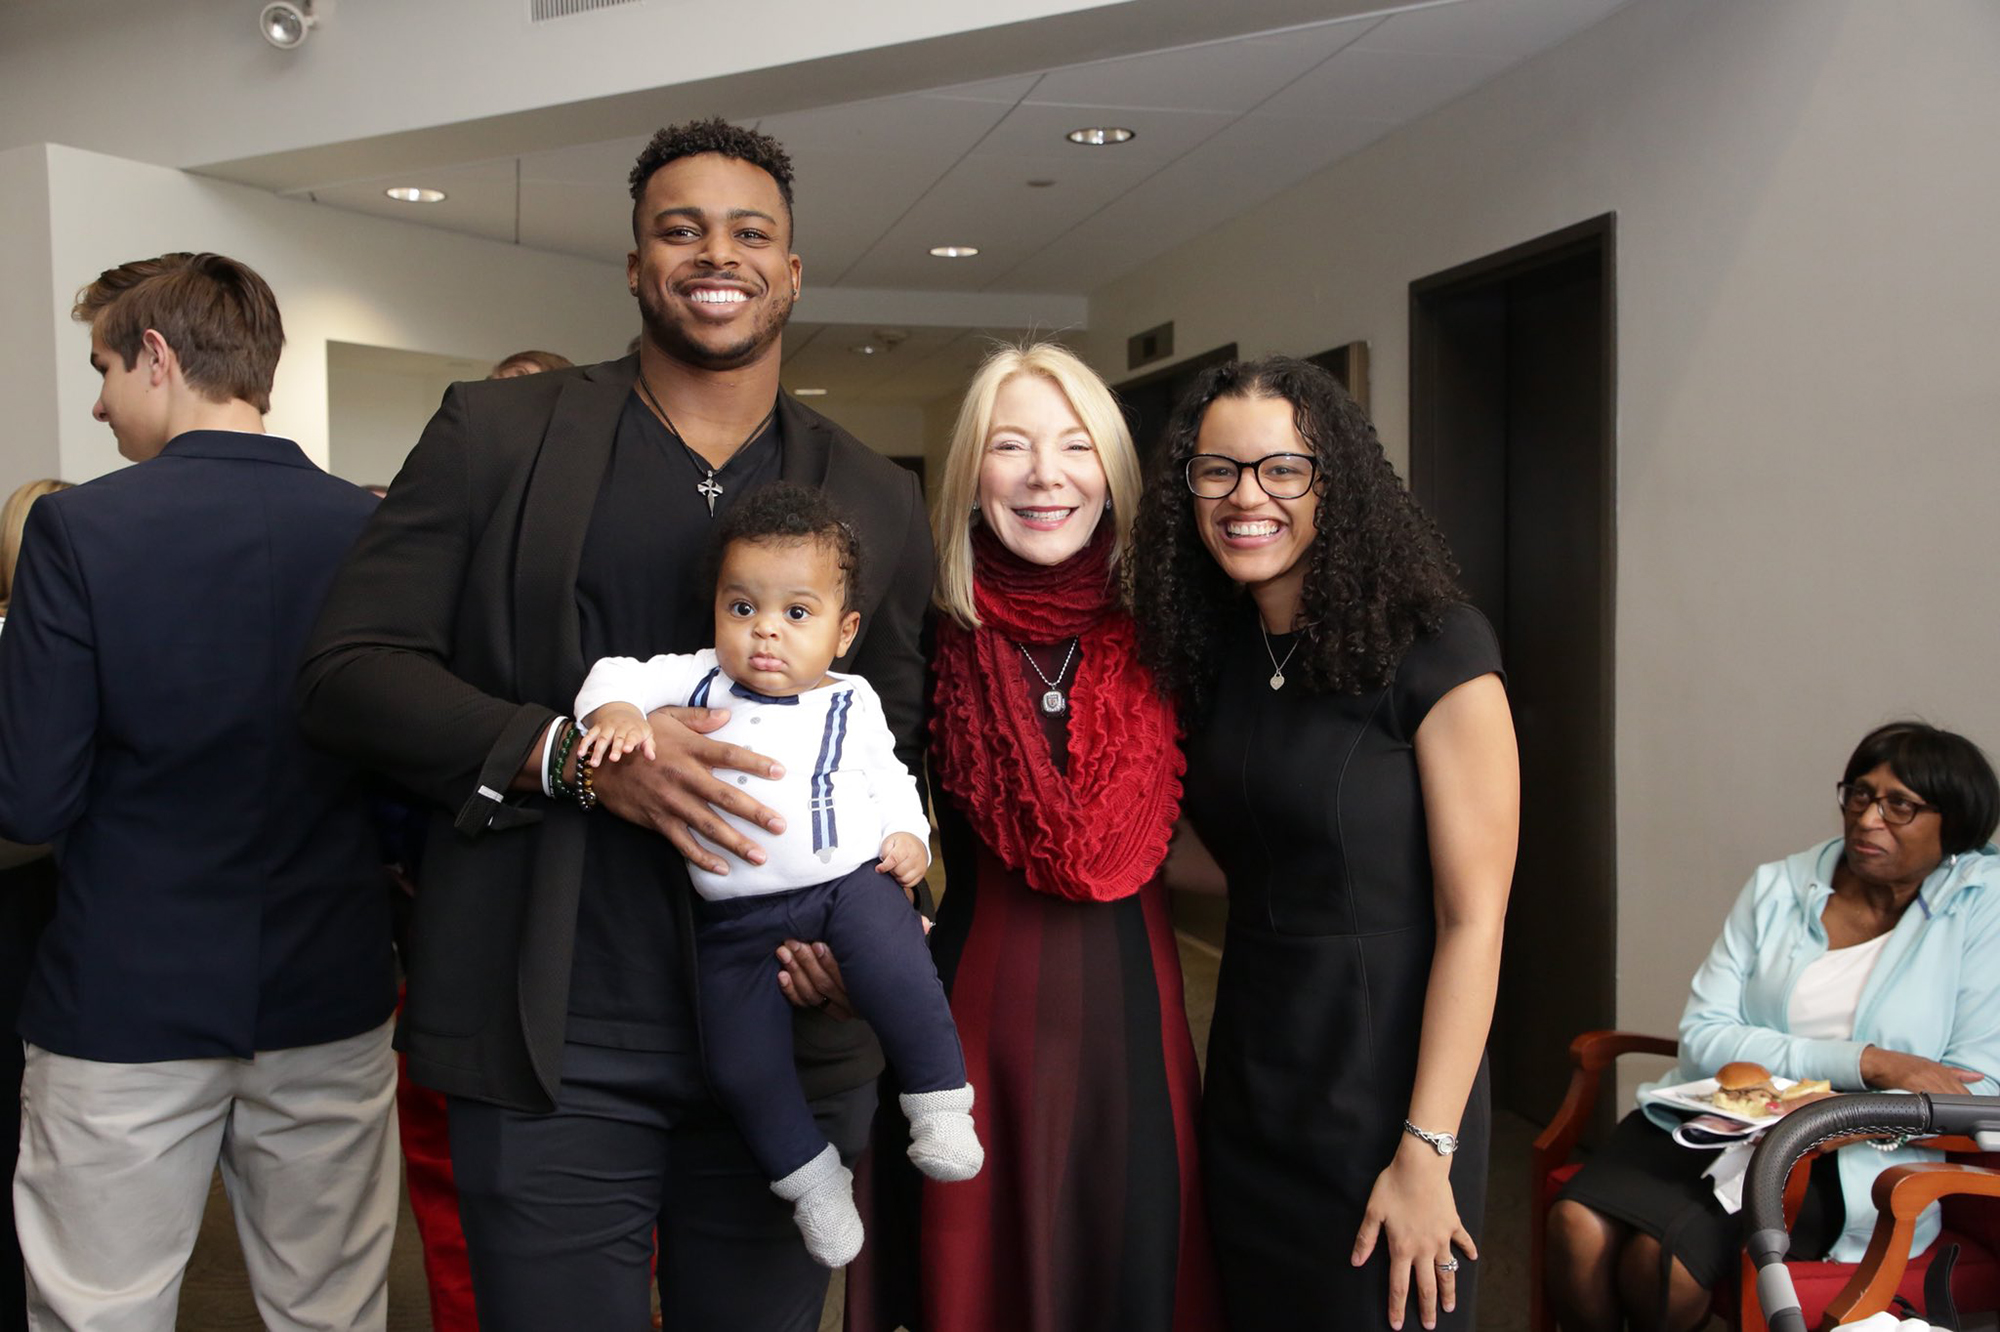 Brandon Copeland, holding his son, with Penn President Amy Gutmann and his wife Taylor Copeland.